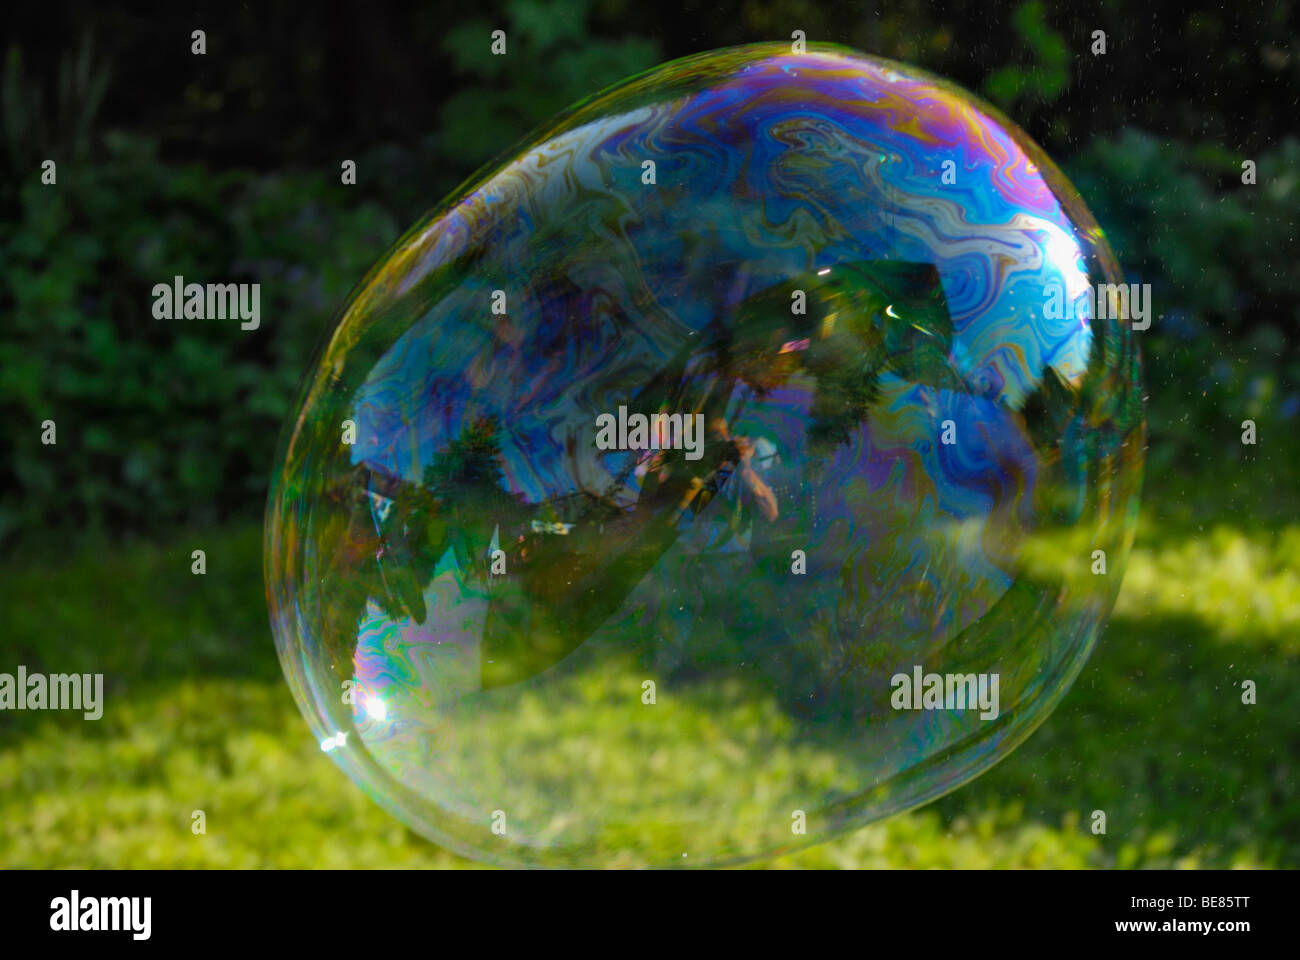 Reflections in a large soap bubble Stock Photo